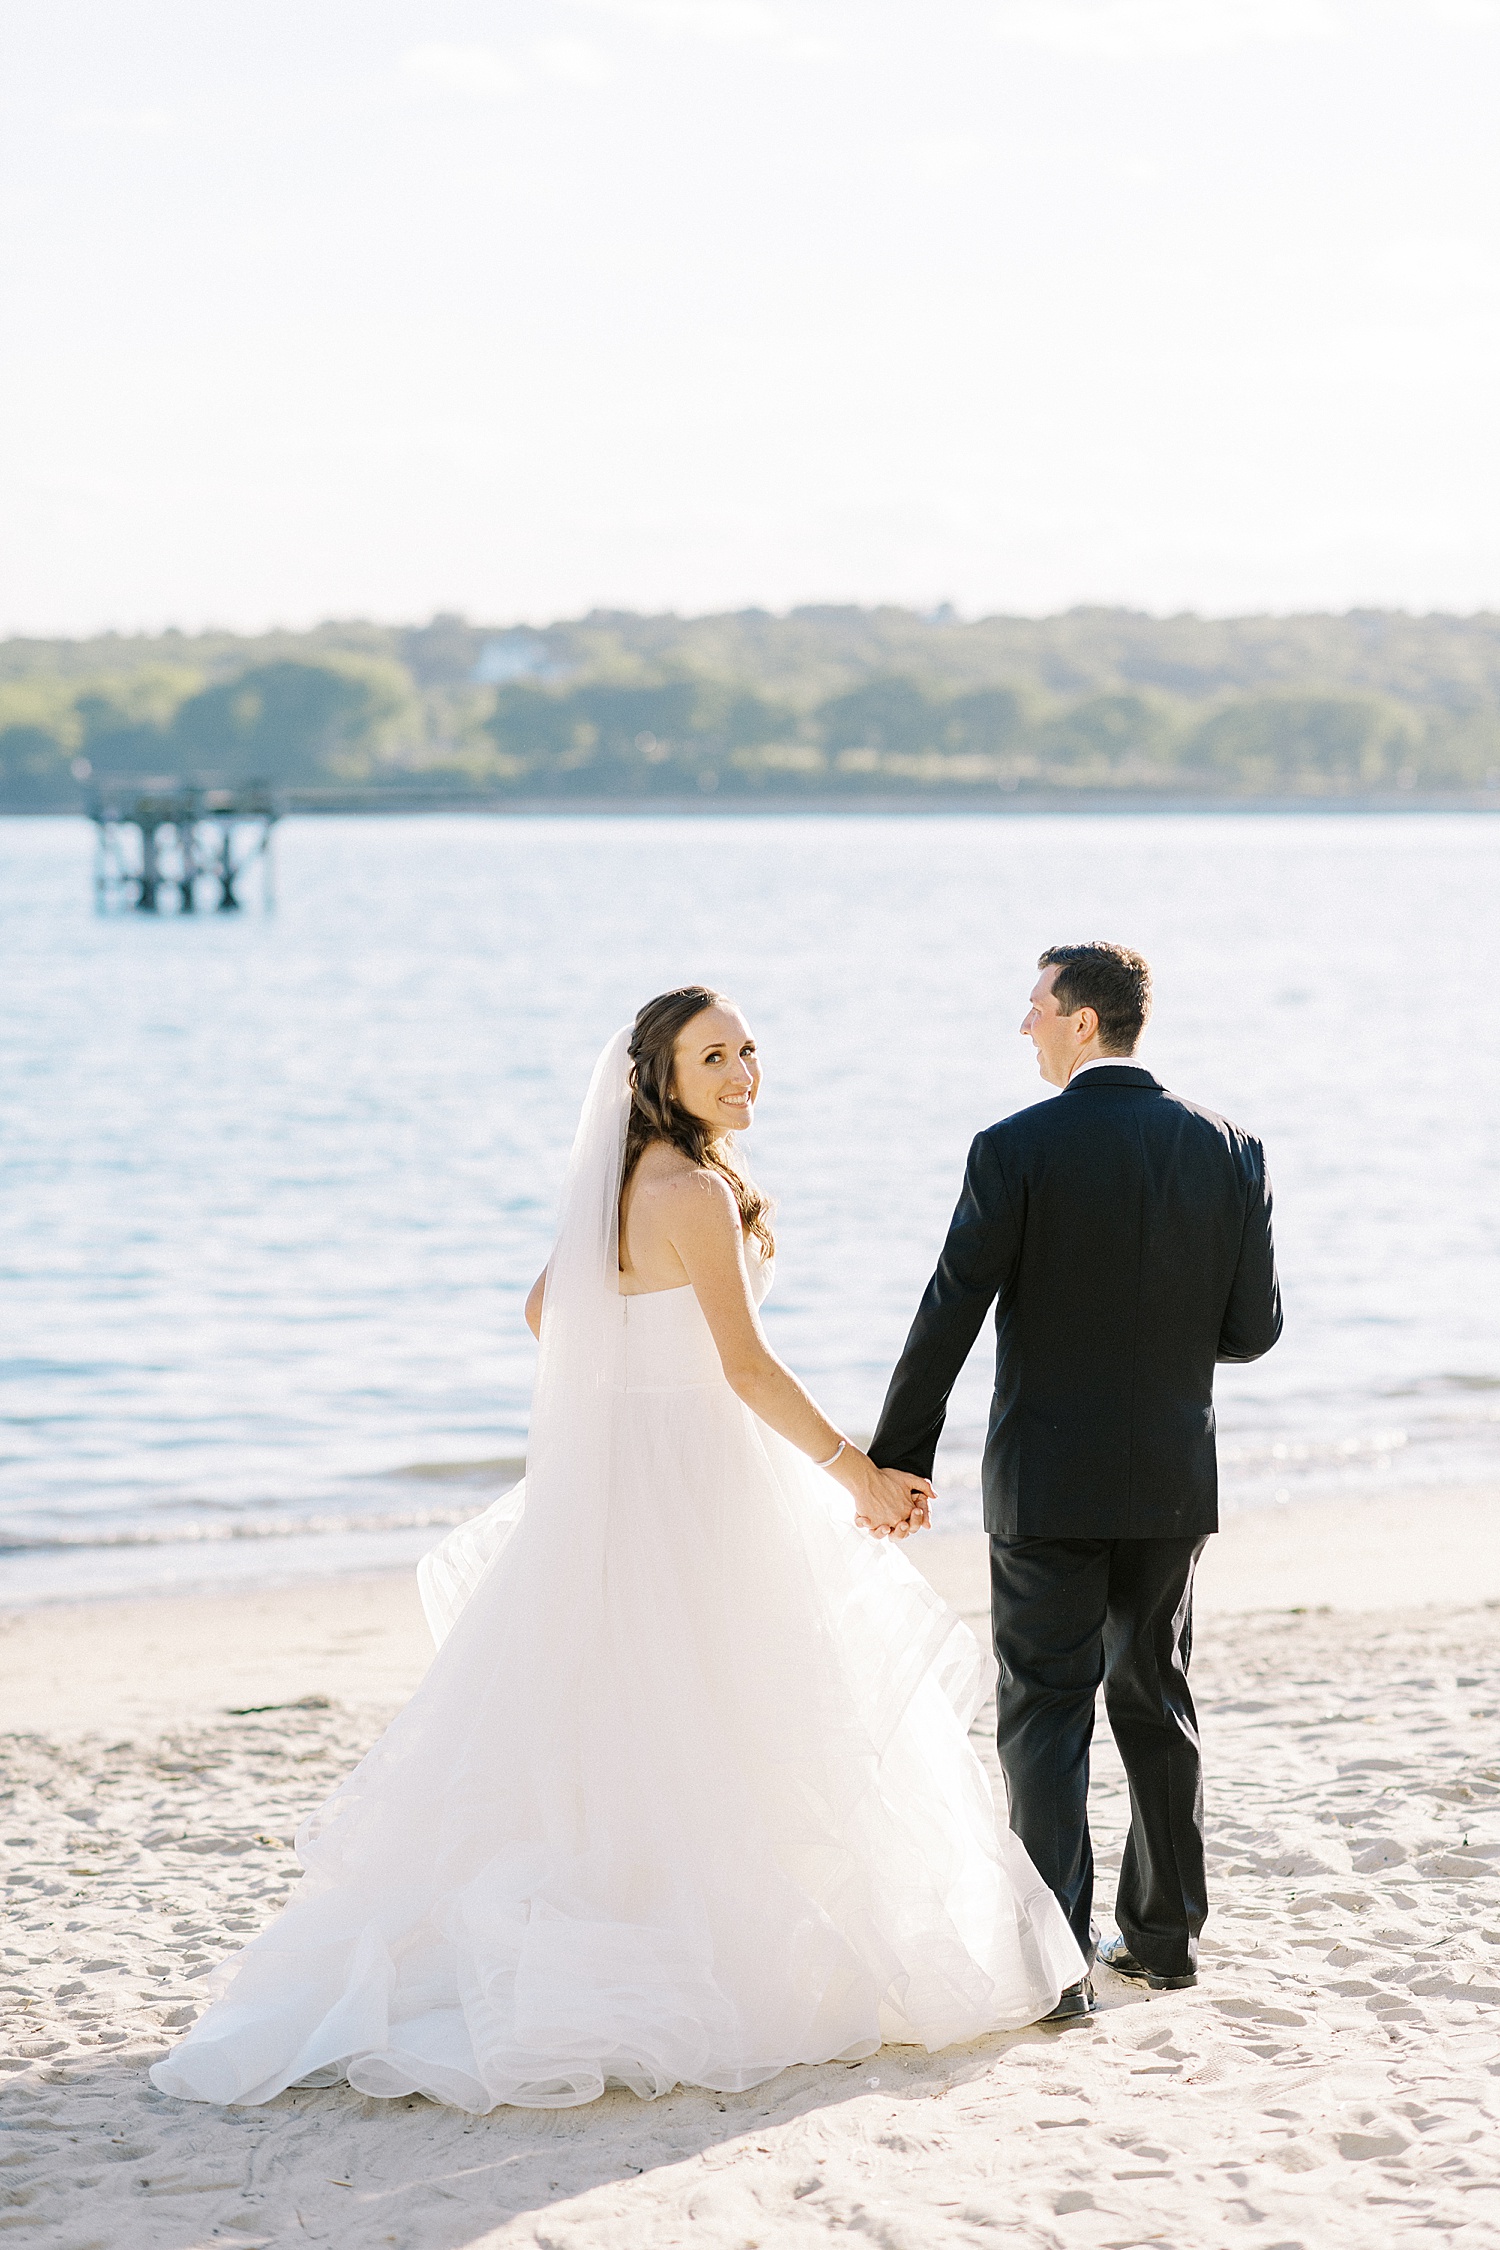 Newlyweds walking by the water by Lynne Reznick photography